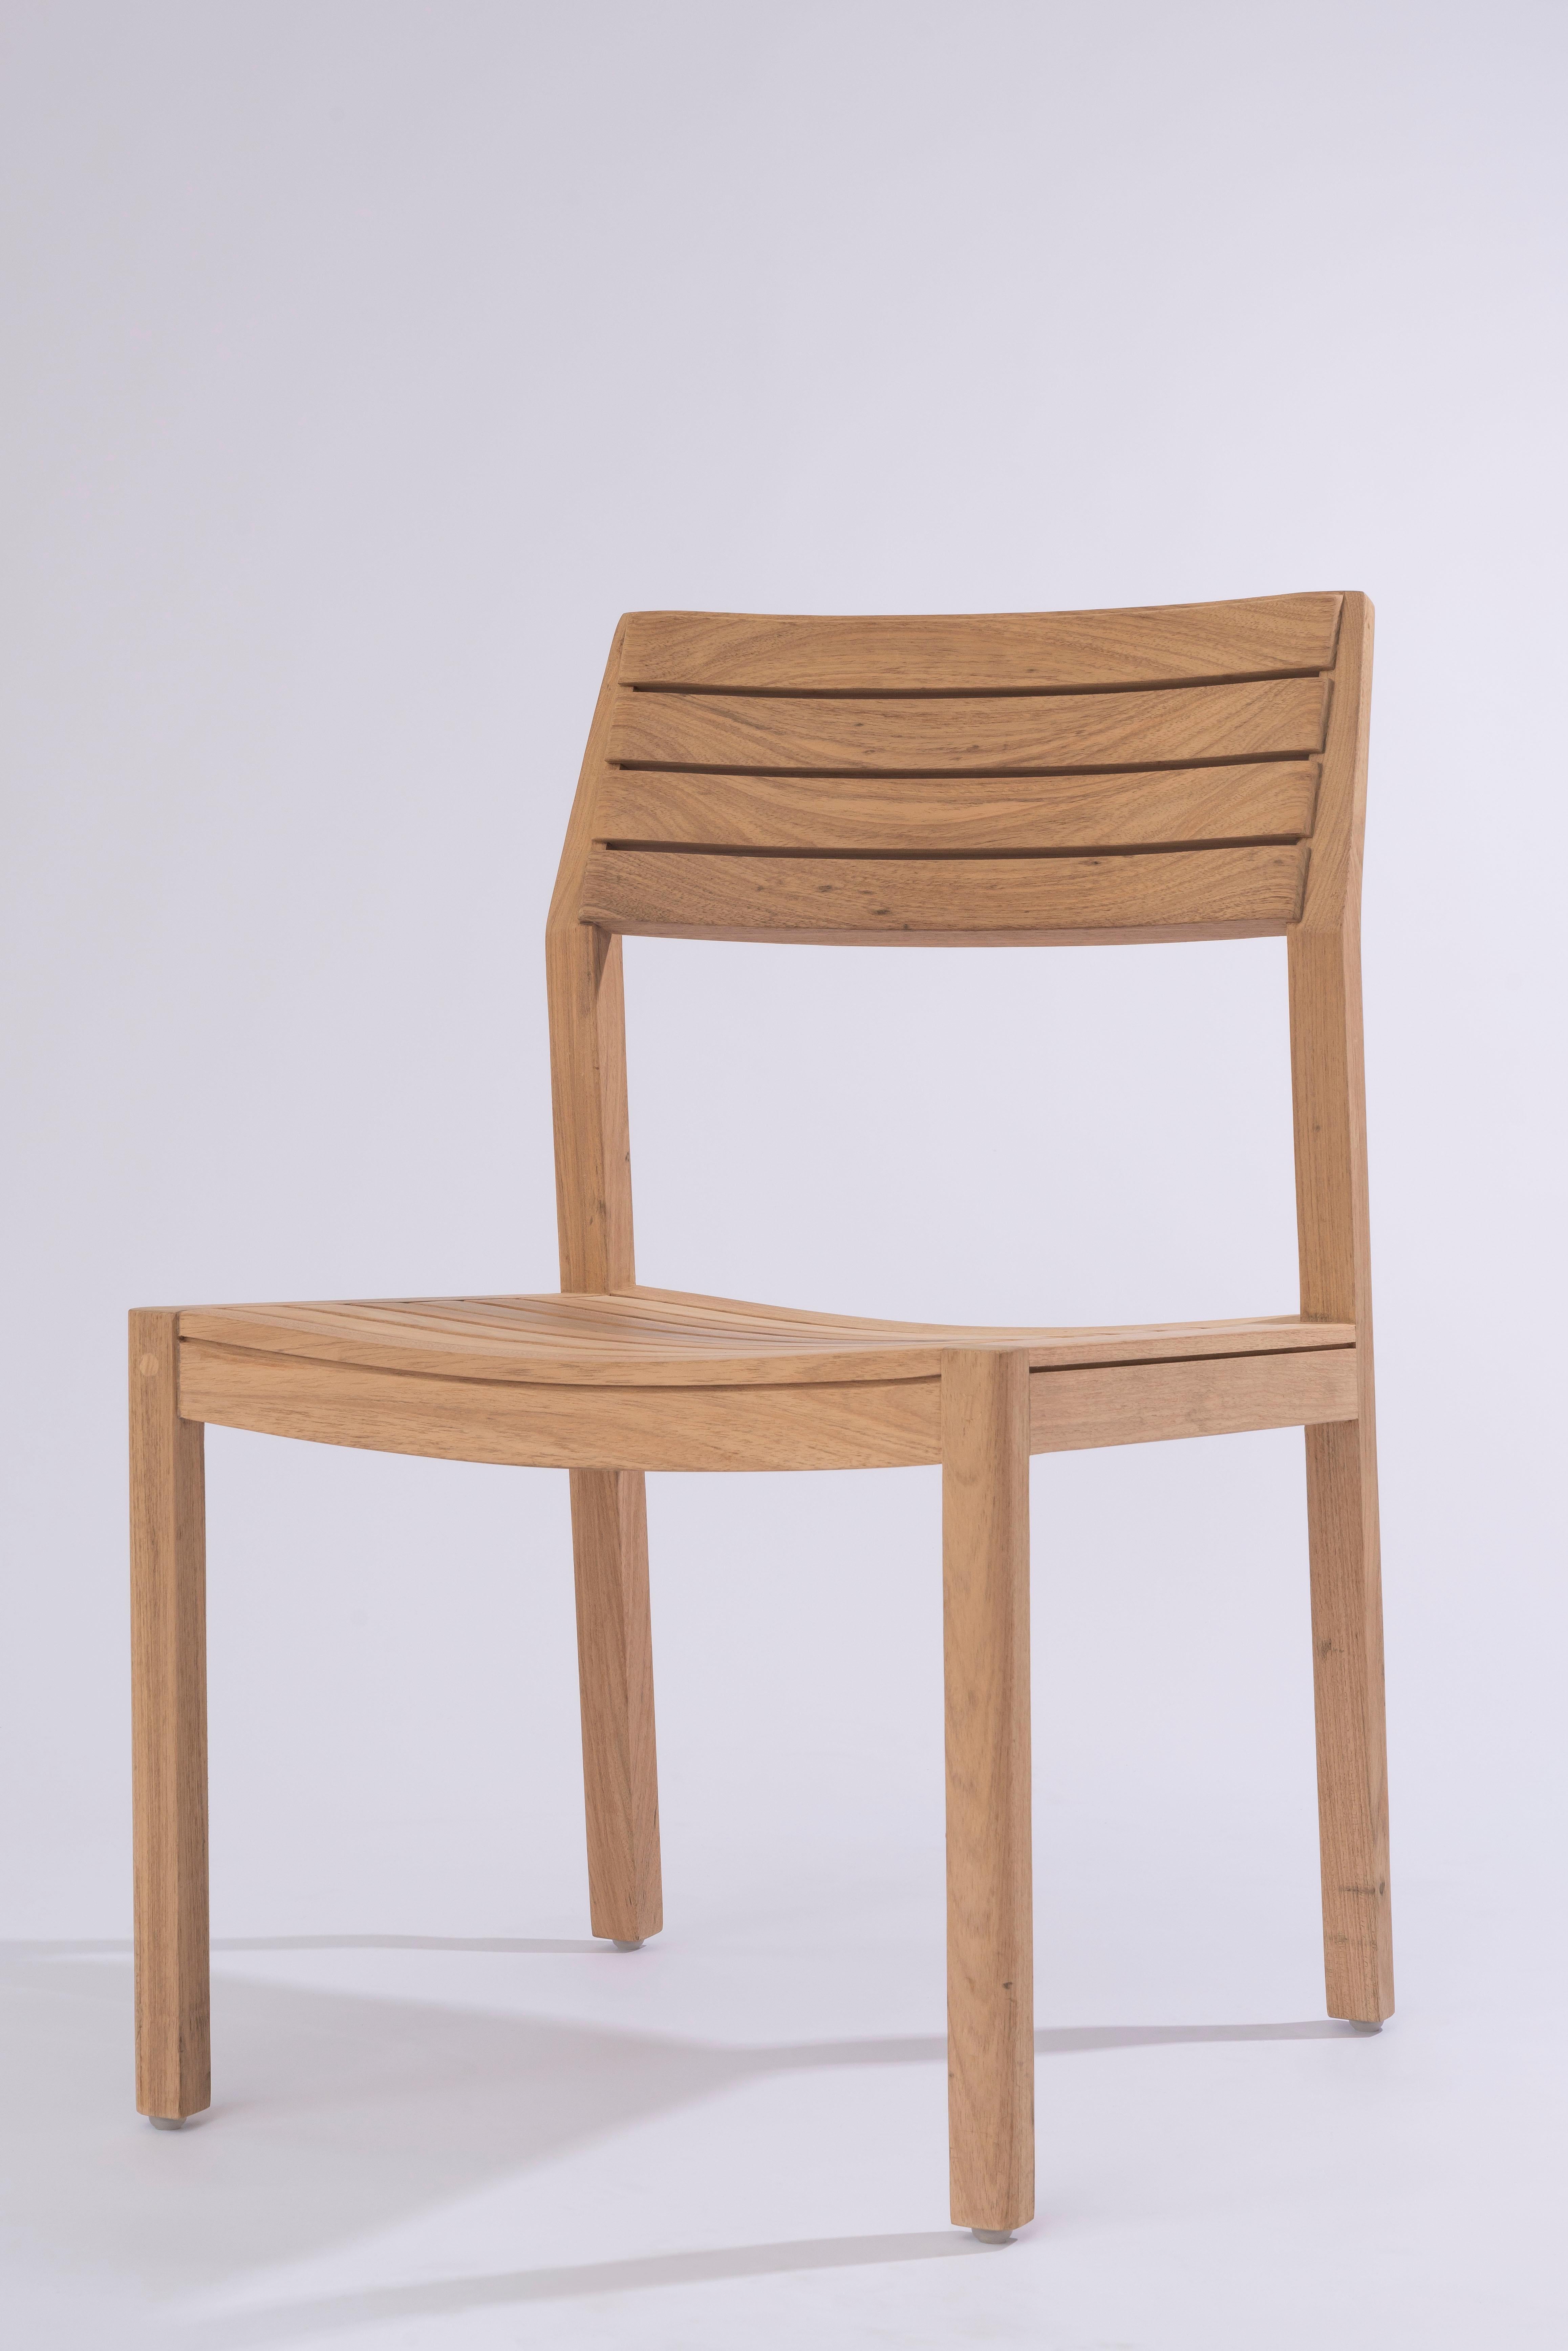 Solid Wood Arms Chair with Wooden Slats, for the Outside, Outdoor Resistant For Sale 2